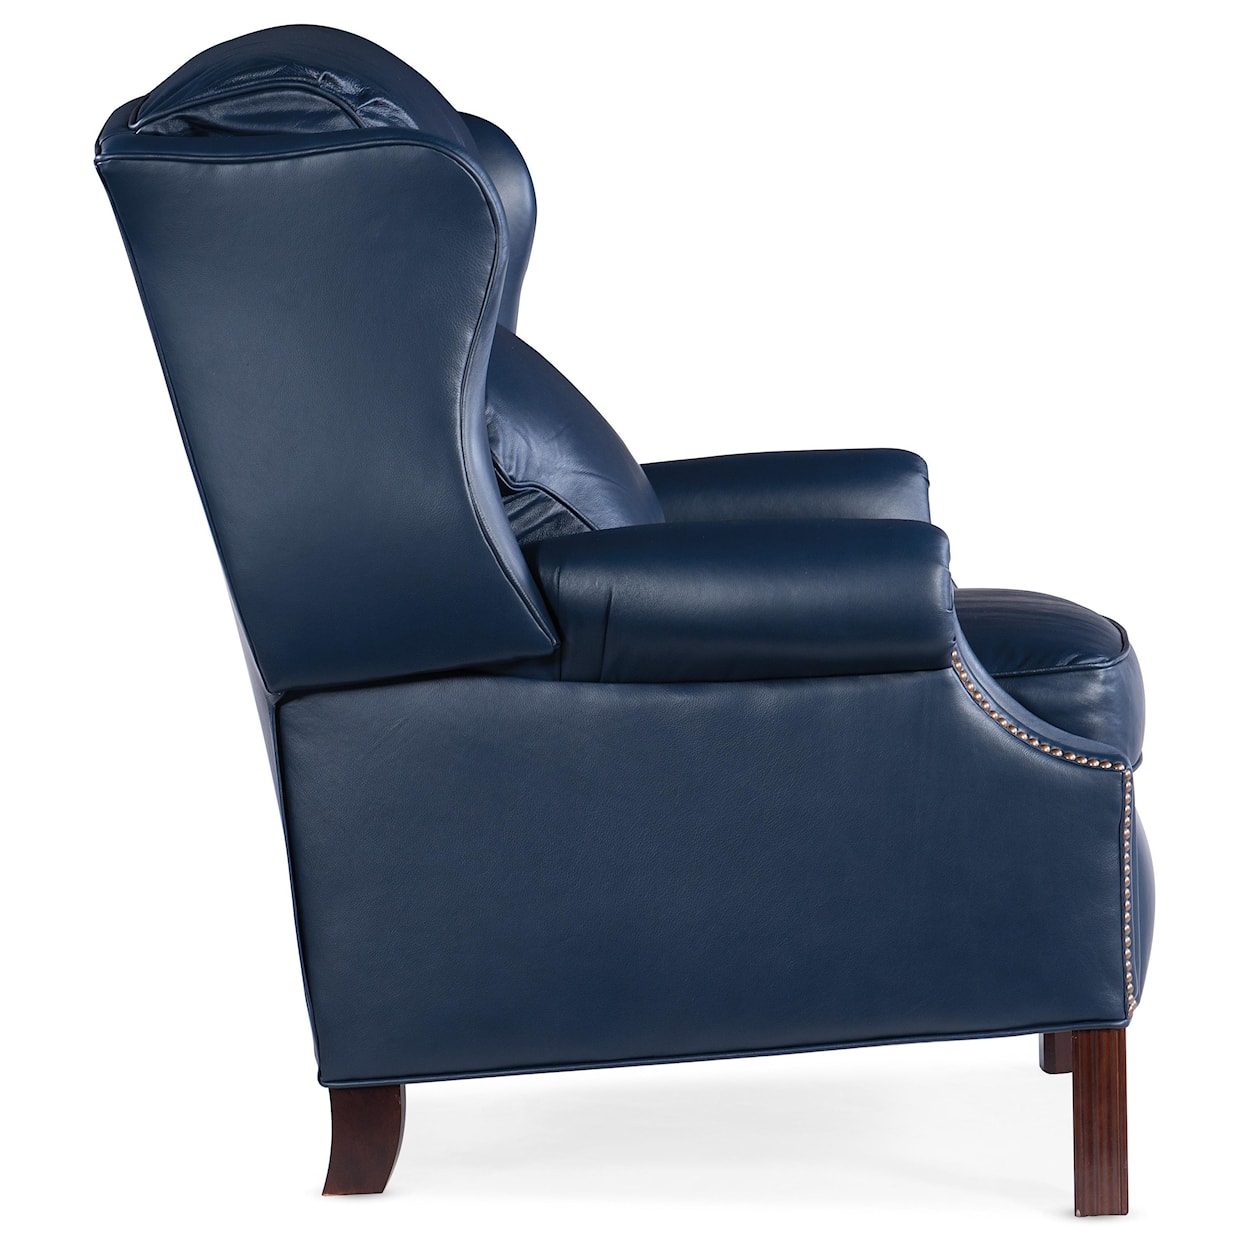 Bradington Young Chippendale Reclining Wing Chair